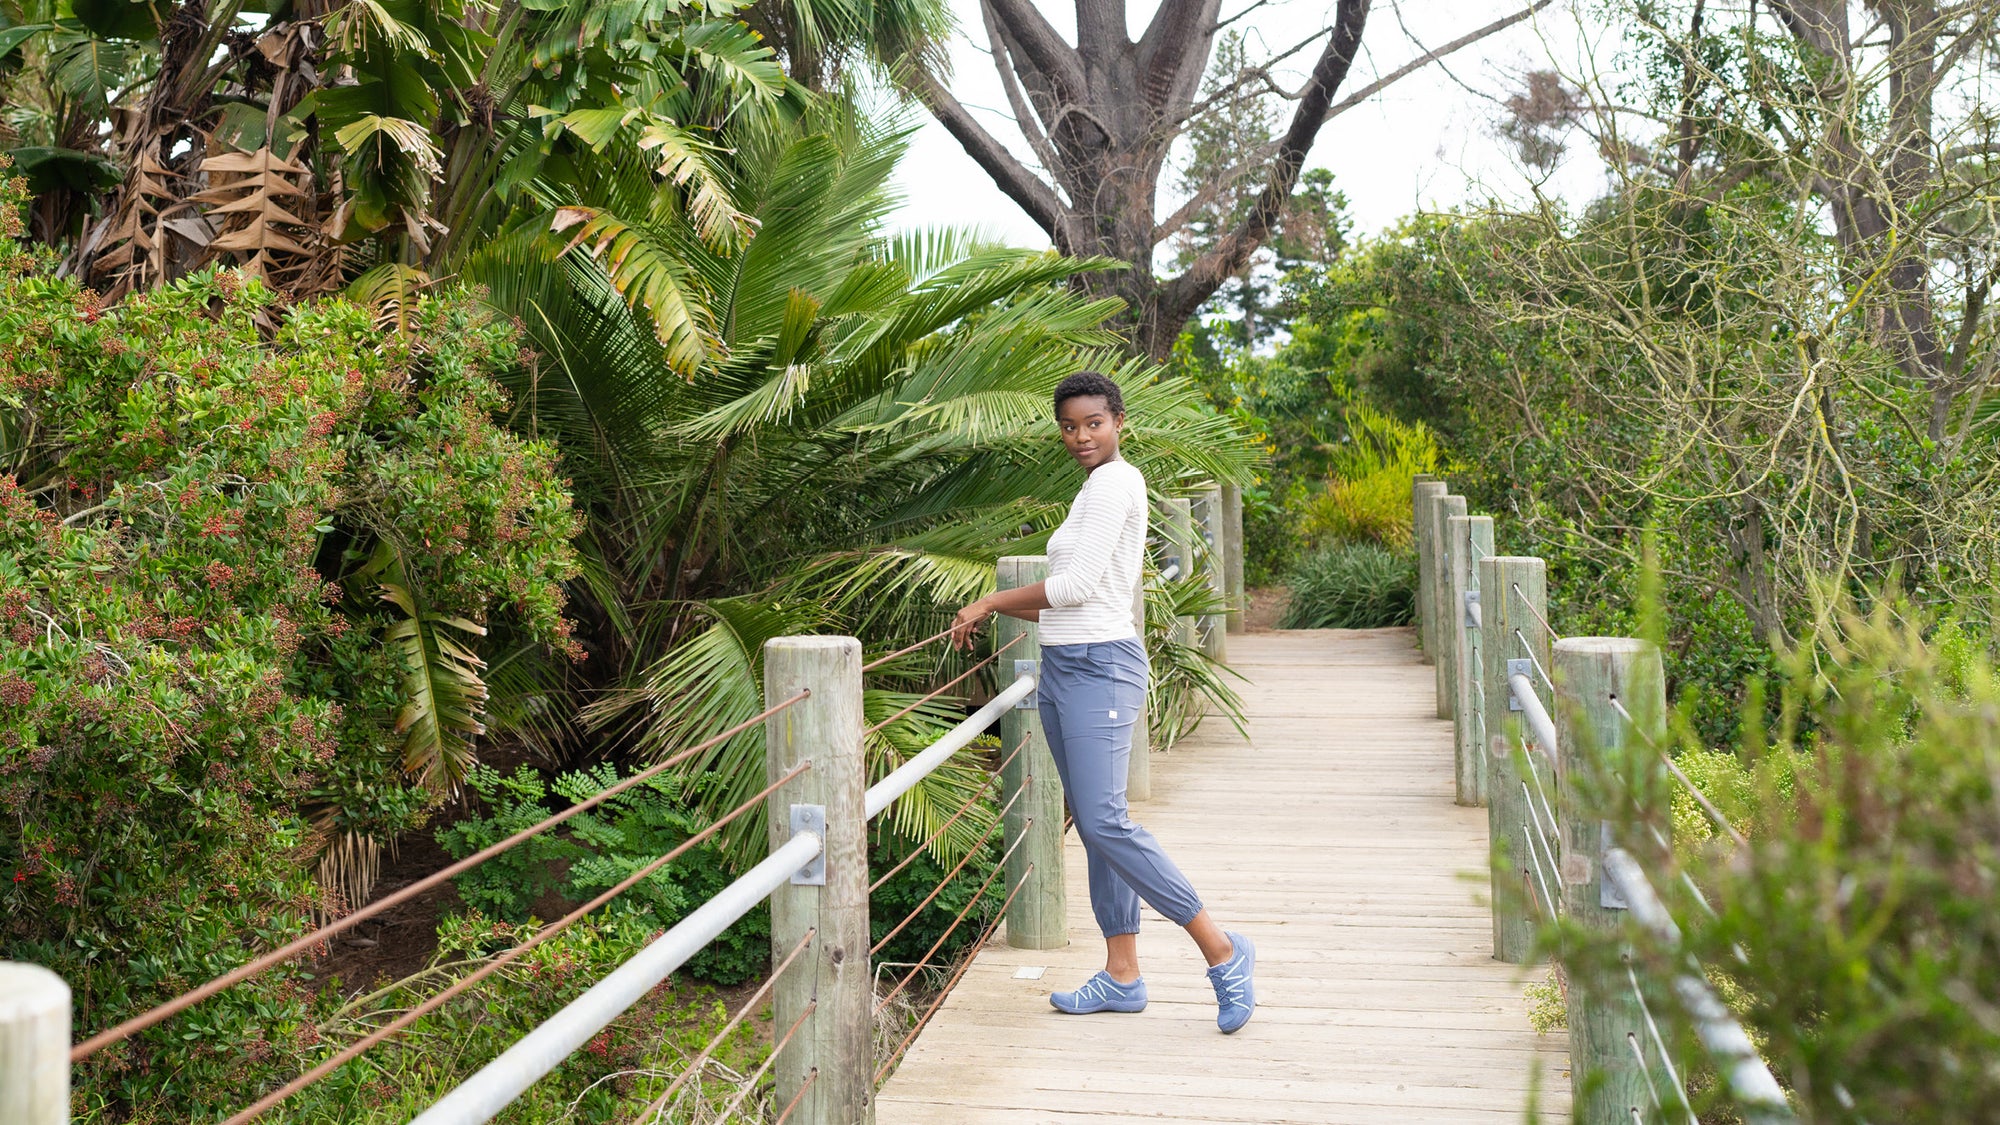 A woman standing on a bridge in nature wearing comfortable attire and lightweight blue sneakers.